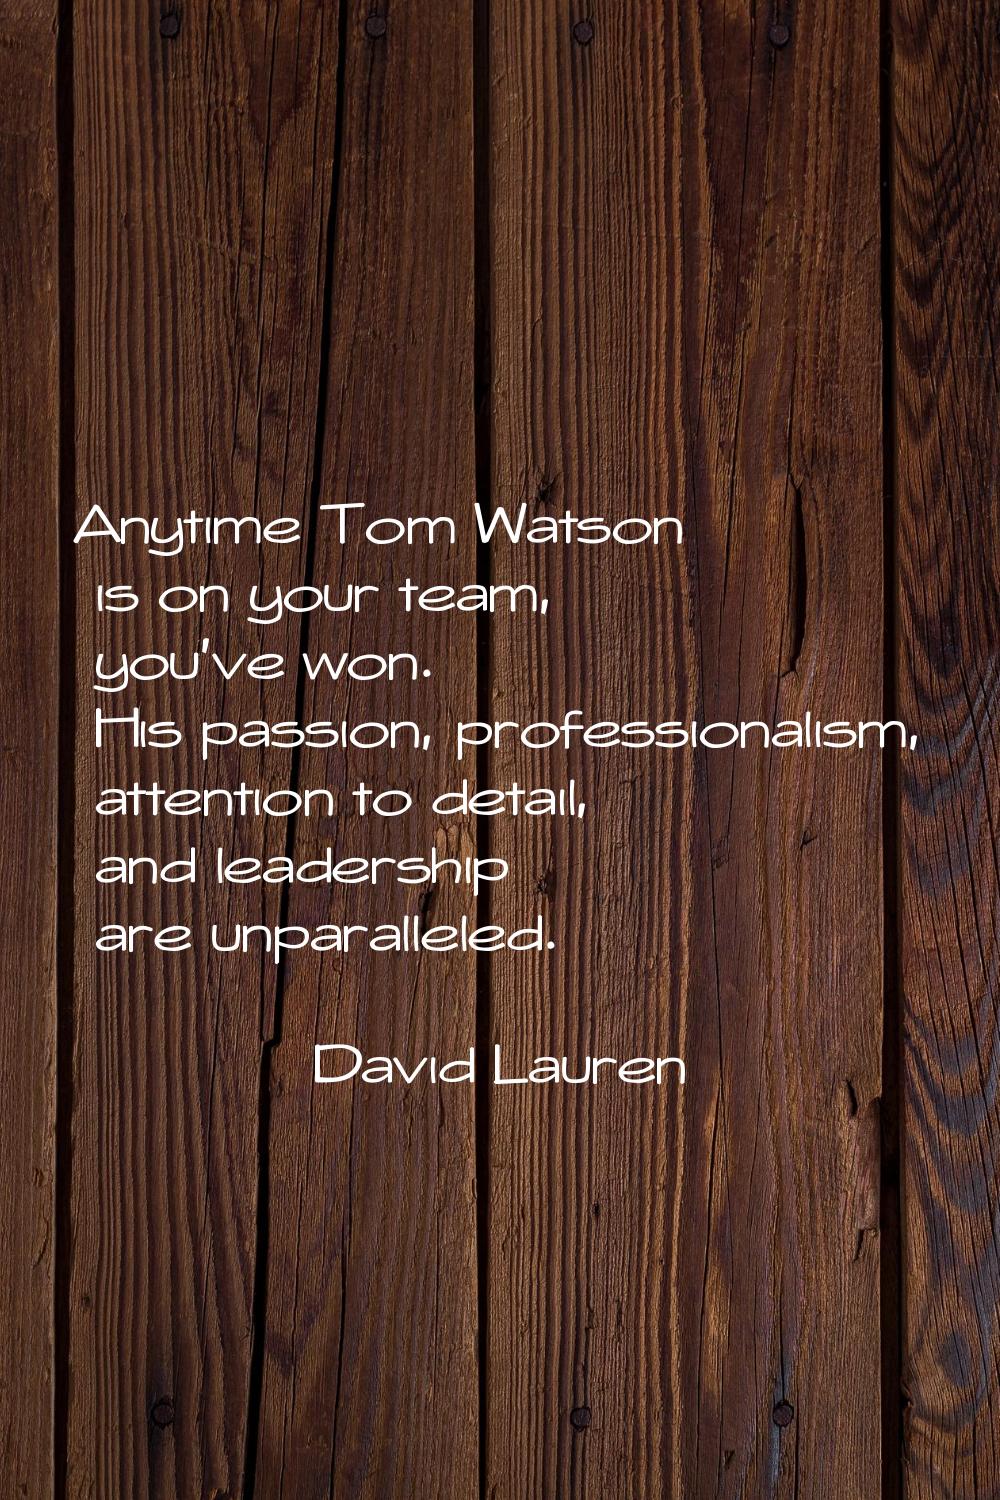 Anytime Tom Watson is on your team, you've won. His passion, professionalism, attention to detail, 